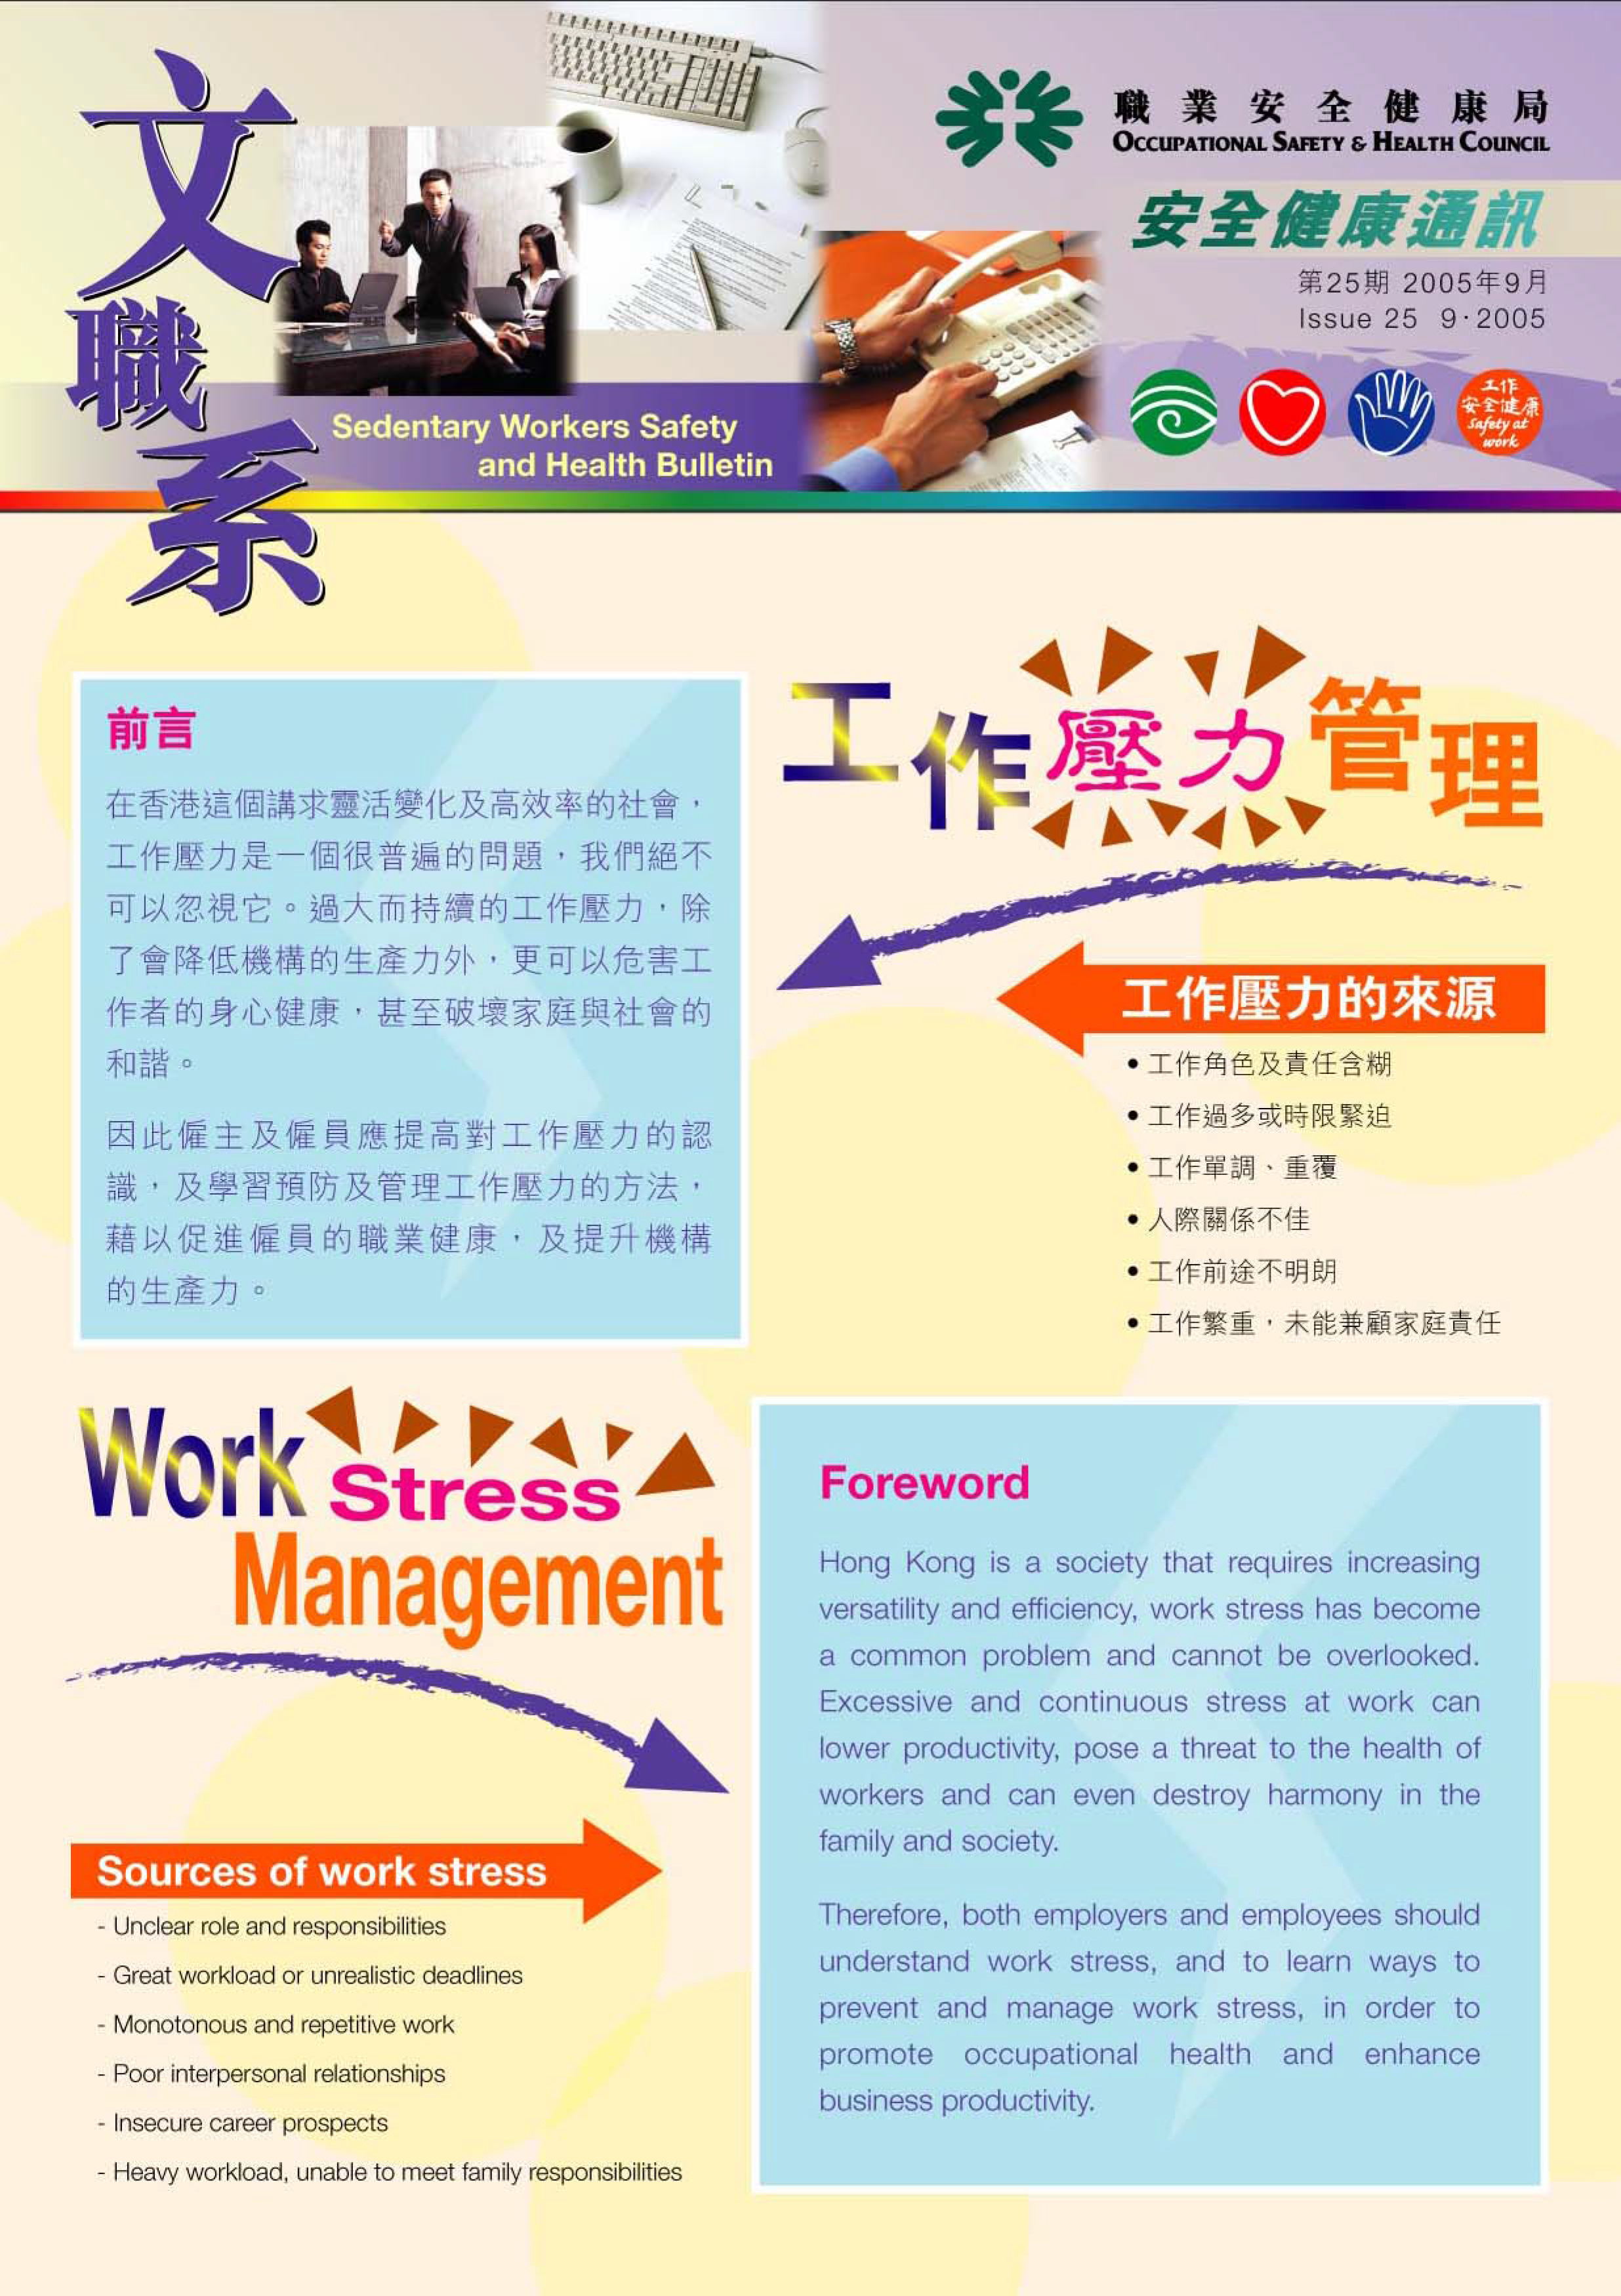 Safety and Health Bulletin: Work Stress Management (published by OSHC)